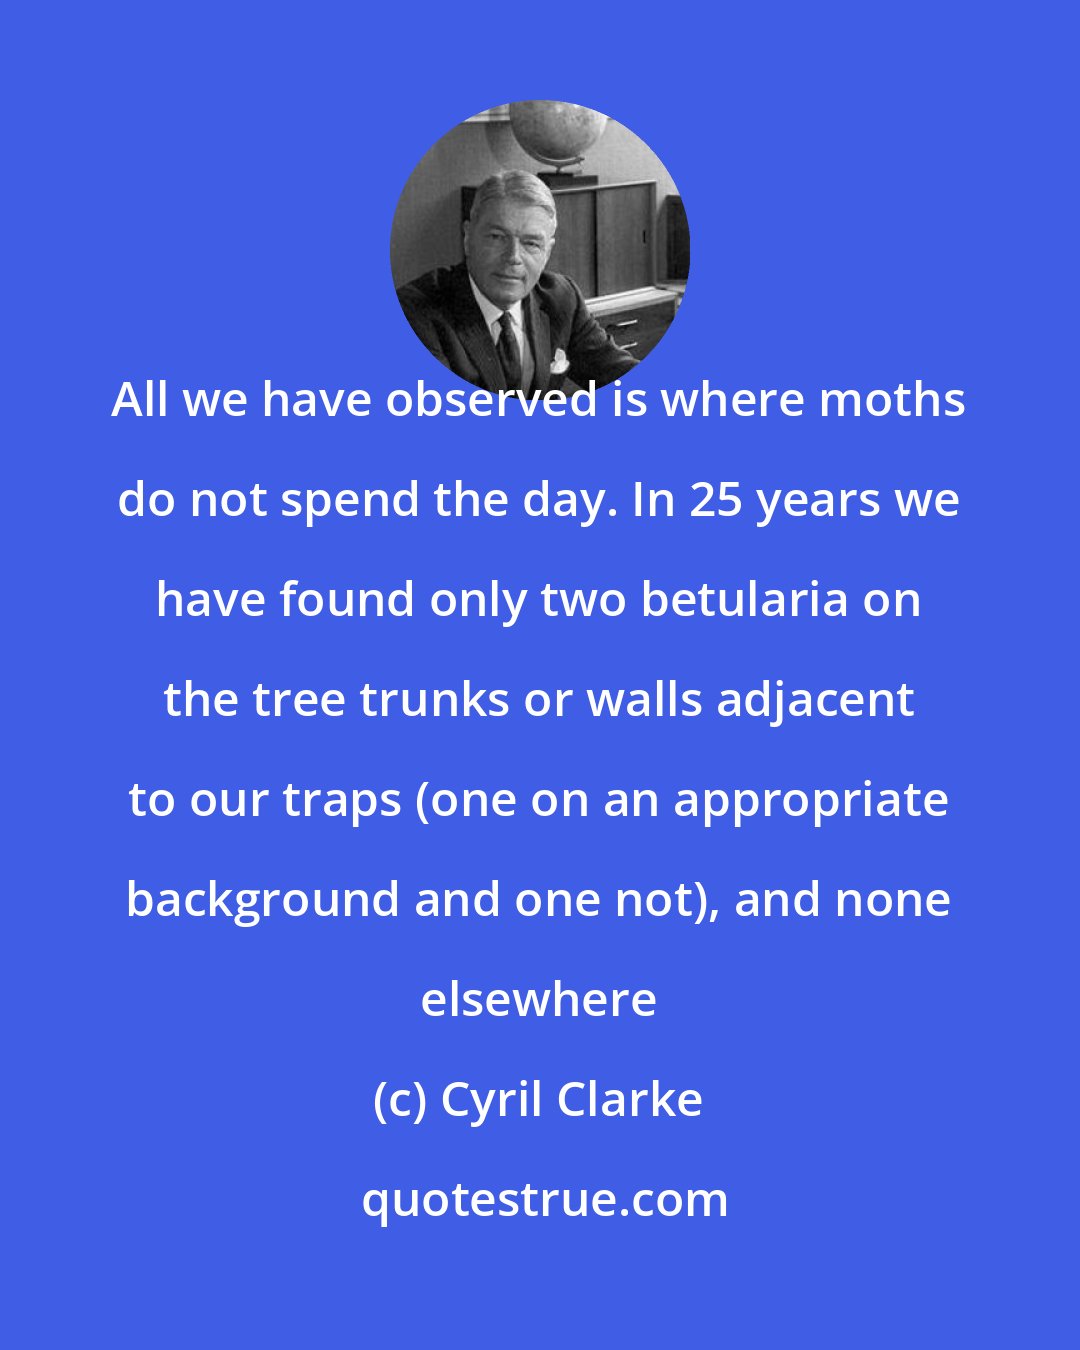 Cyril Clarke: All we have observed is where moths do not spend the day. In 25 years we have found only two betularia on the tree trunks or walls adjacent to our traps (one on an appropriate background and one not), and none elsewhere